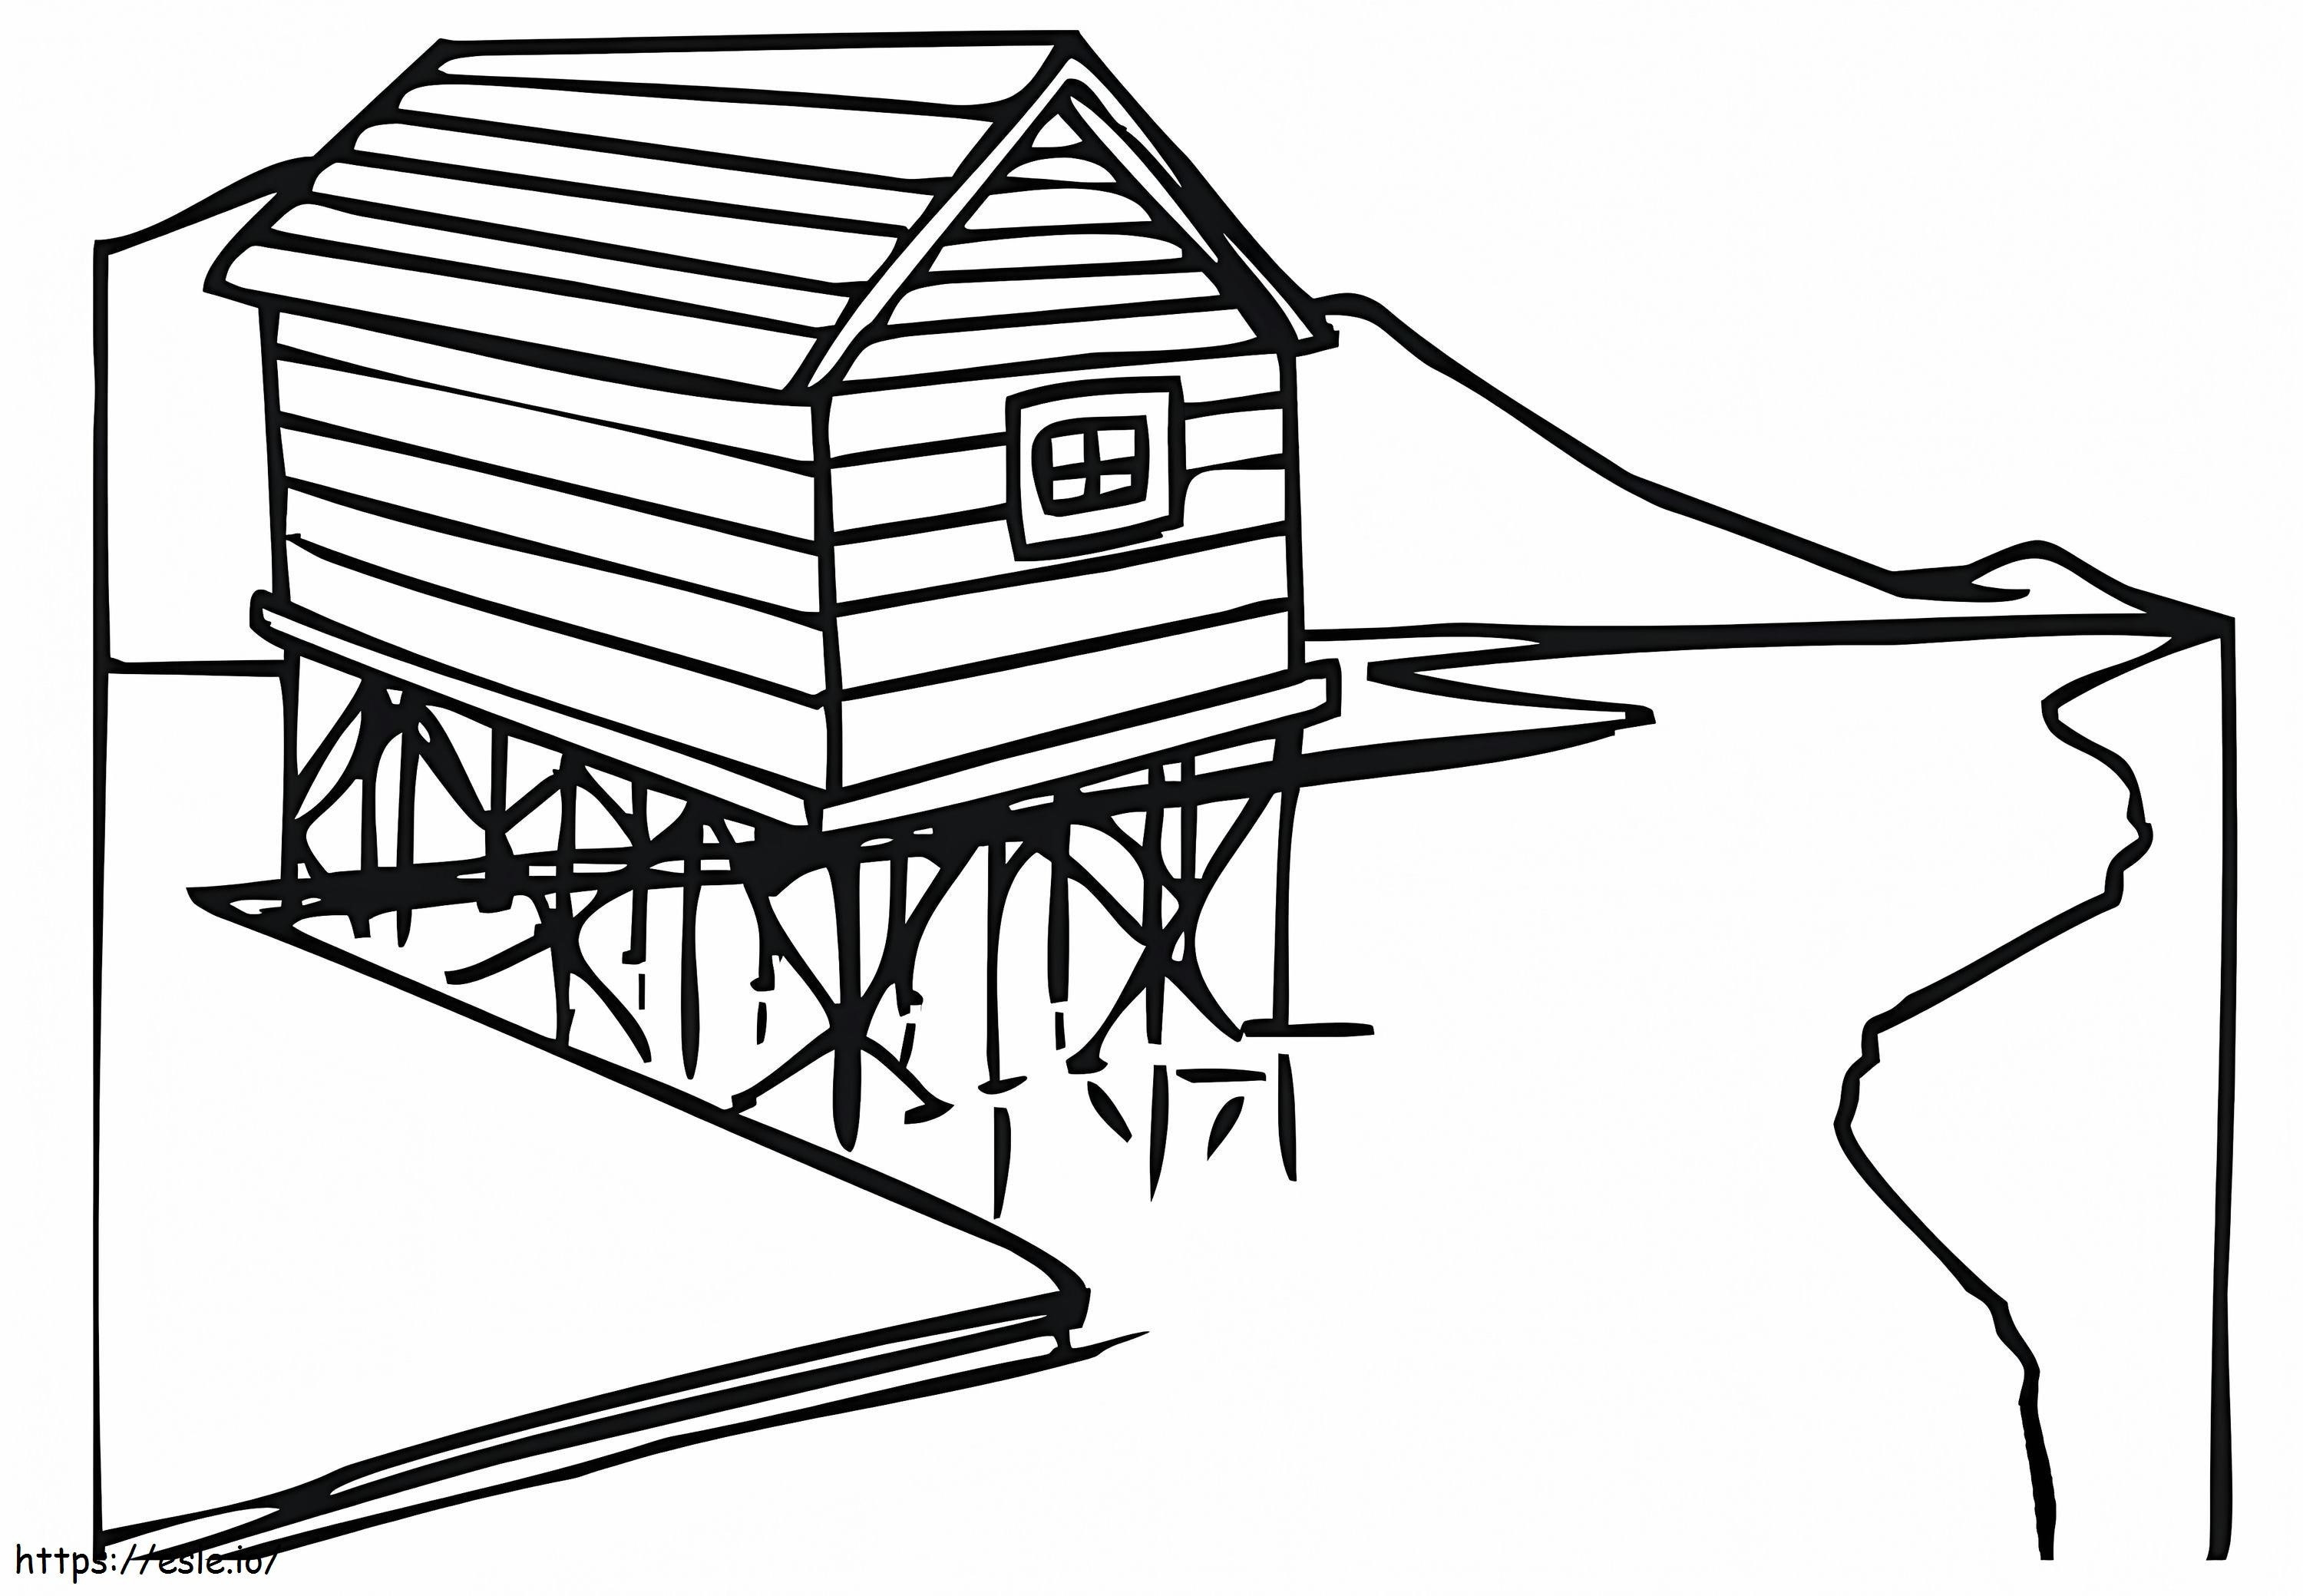 House On Stilts coloring page